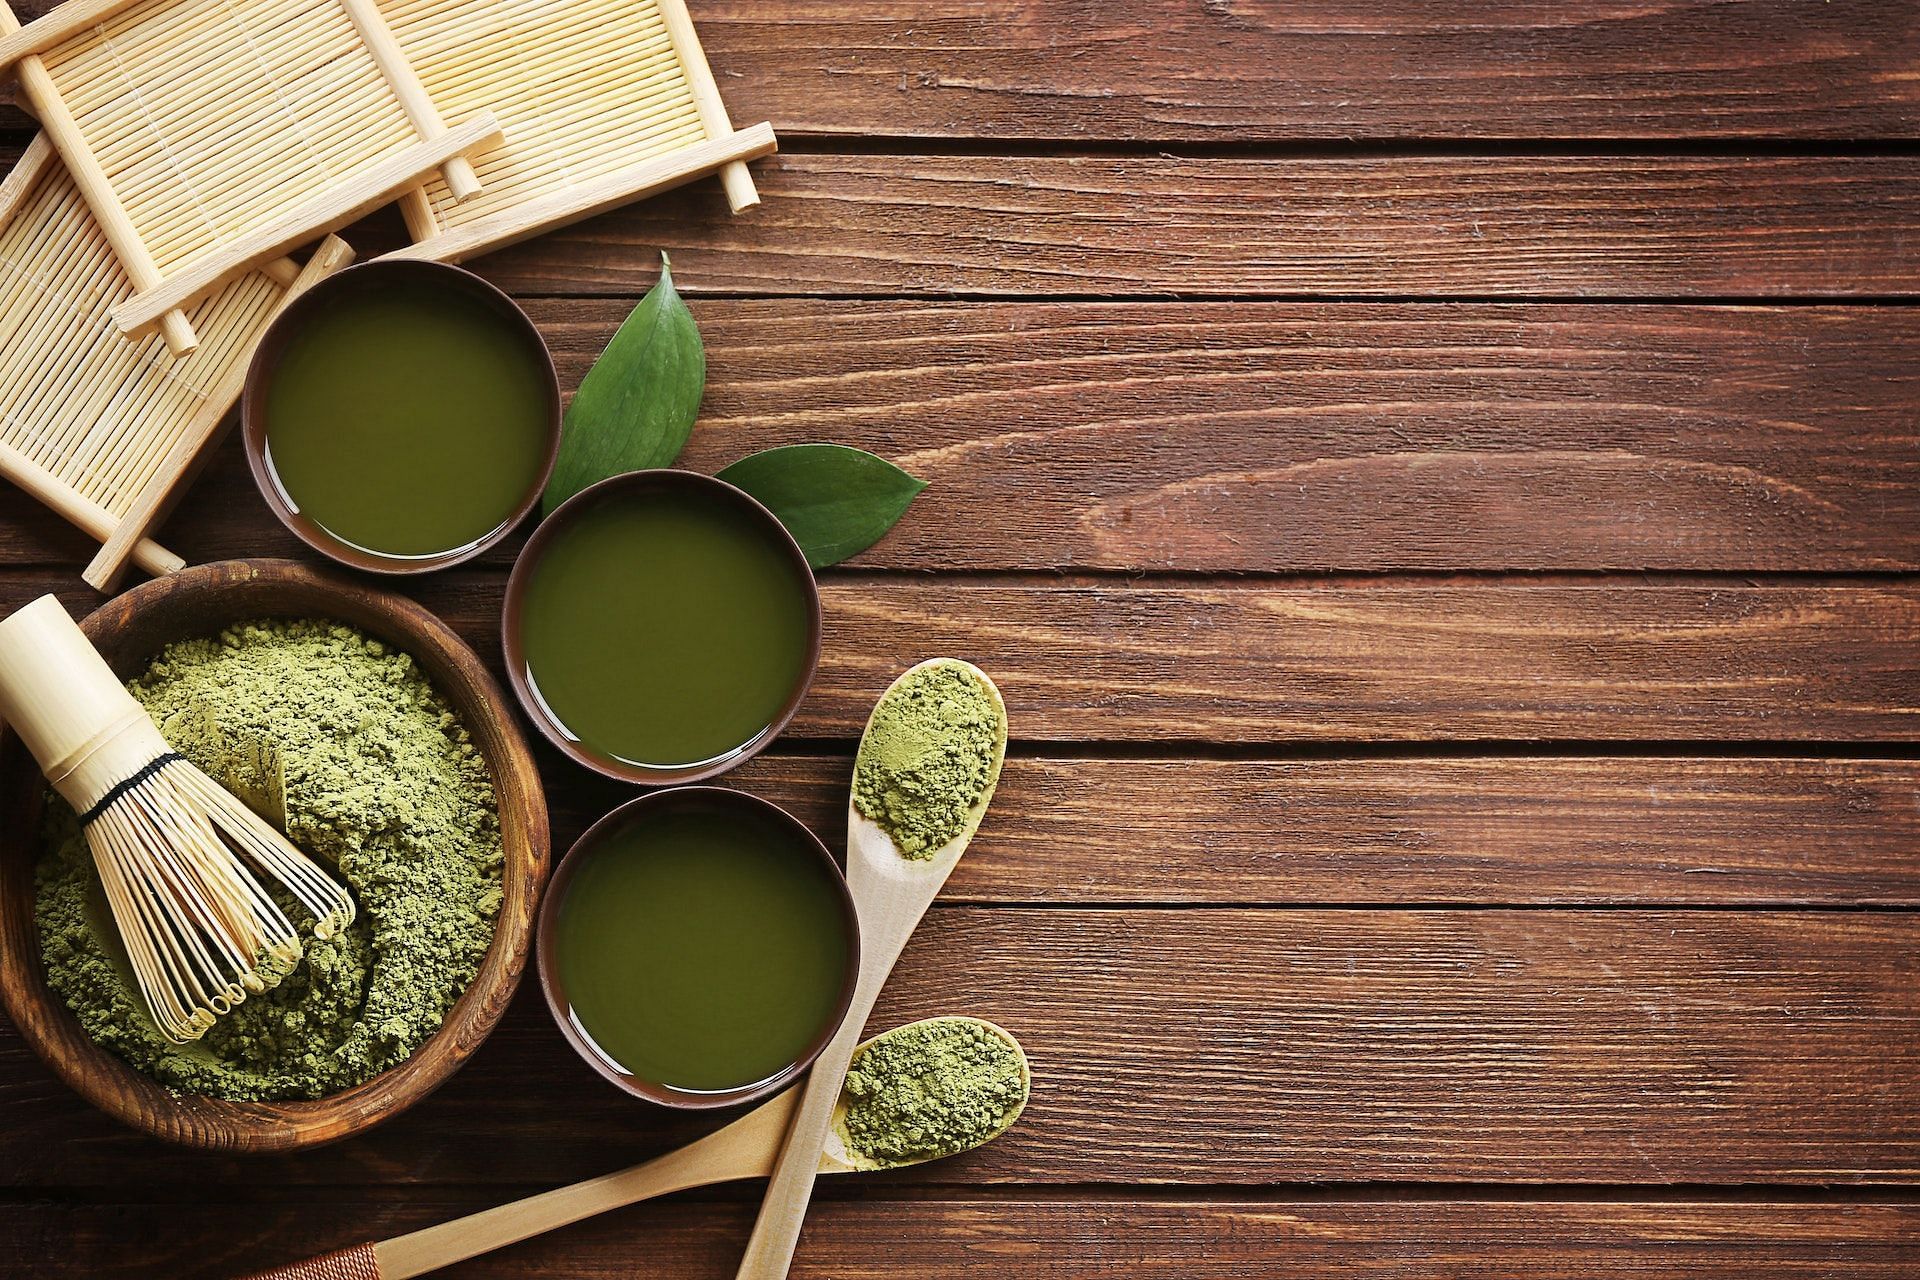 Green tea helps get rid of different types of acne. (Photo via Pexels/Pixabay)